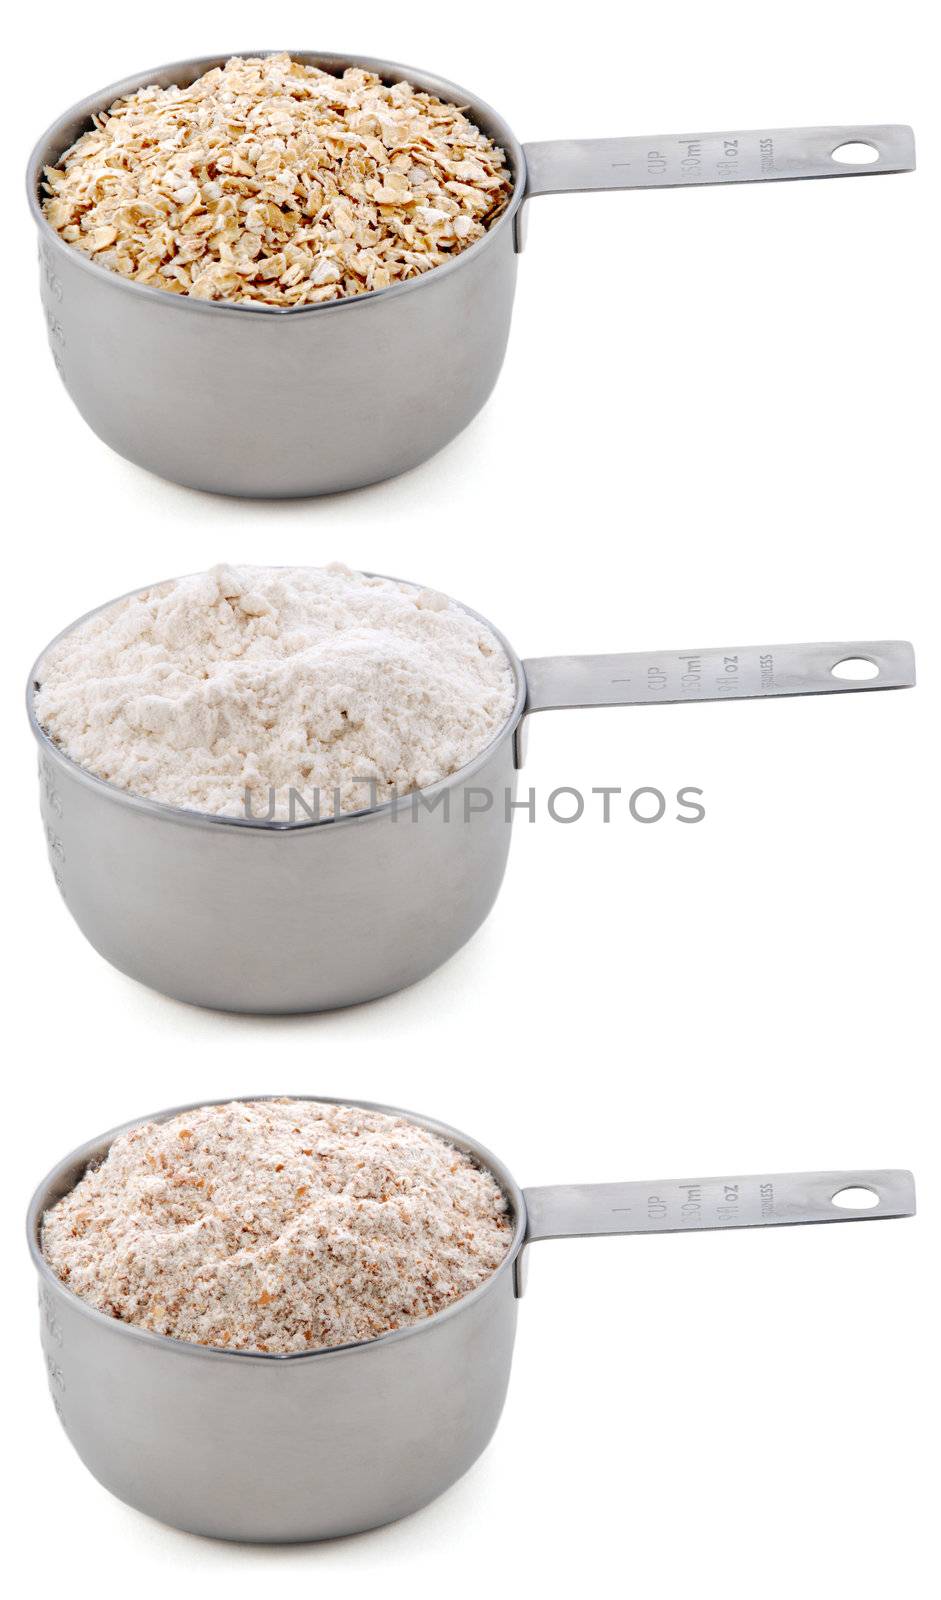 Everyday staple ingredients - rolled oats, plain or all-purpose flour and wholemeal or wheatmeal flour - in cup measures, isolated on a white background